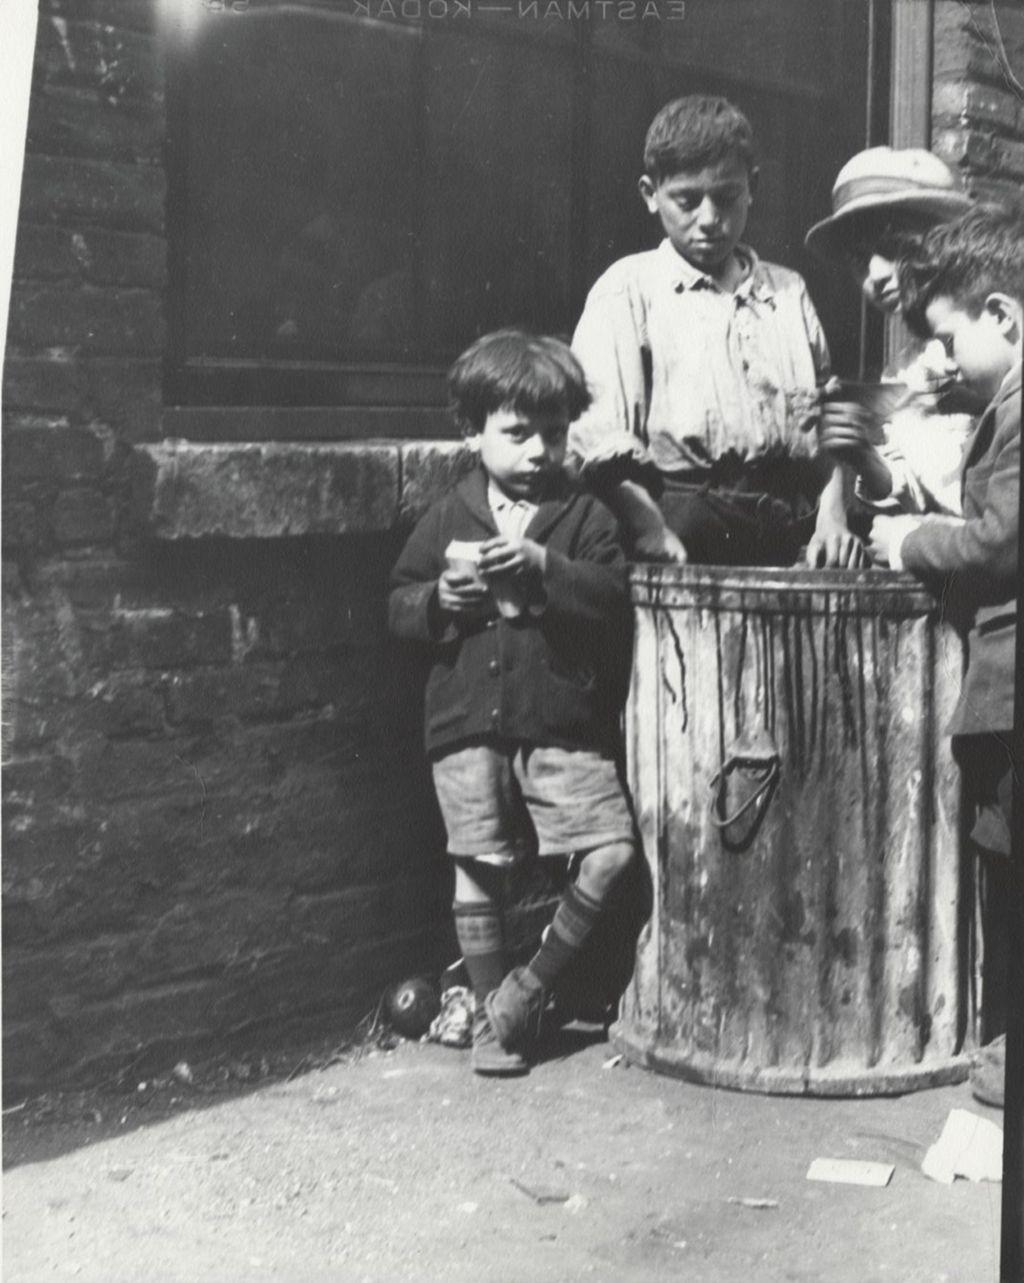 Miniature of Four boys surround a garbage can in alley